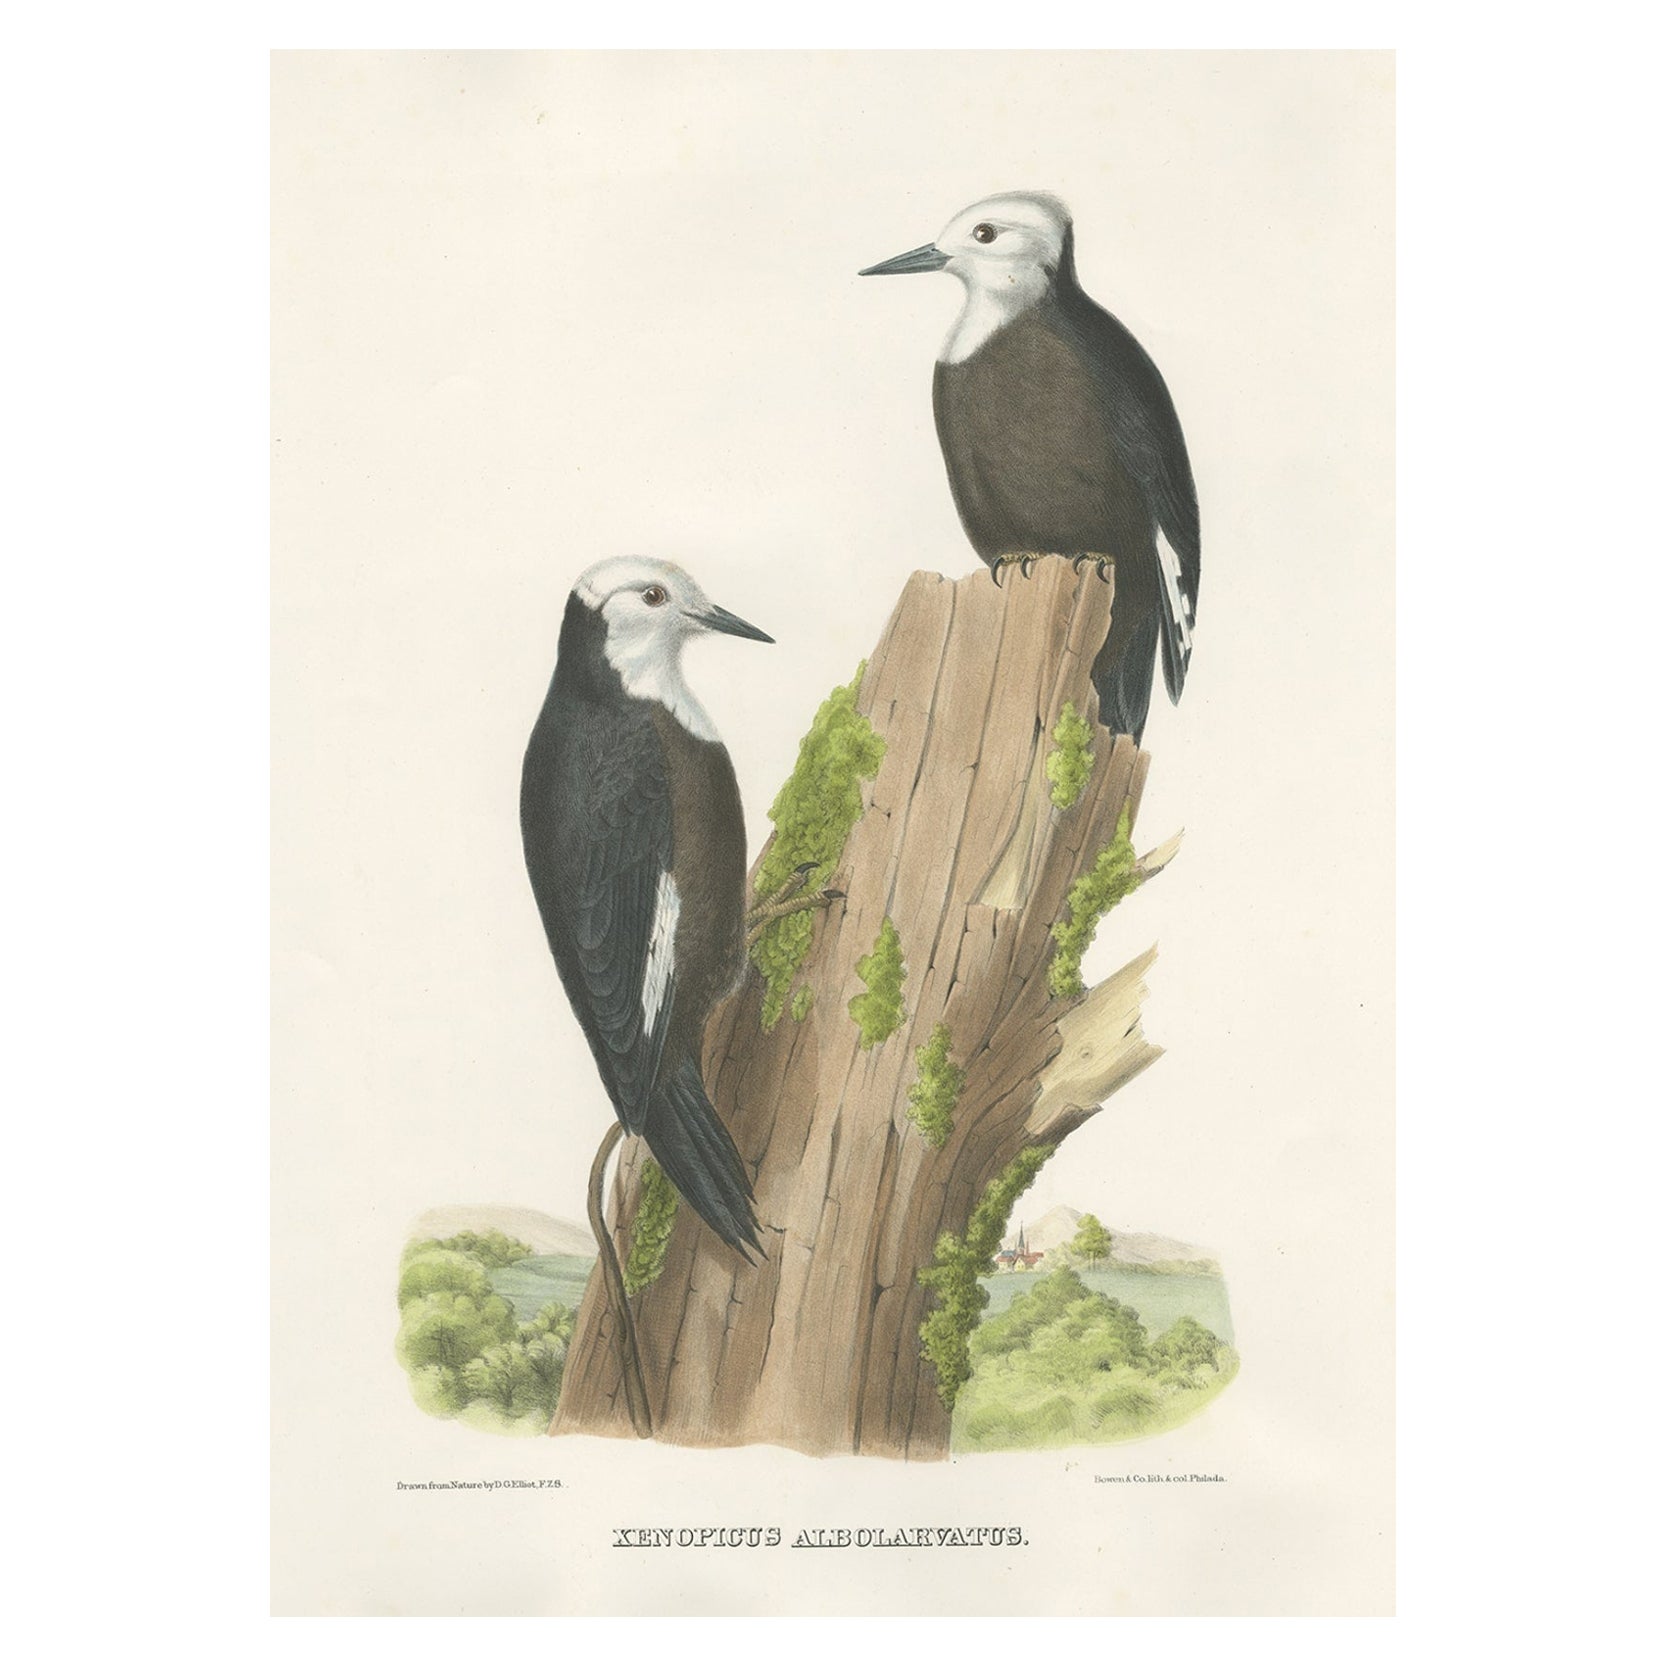 Antique Hand-Colored Print of North American White-Headed Woodpecker Birds, 1869